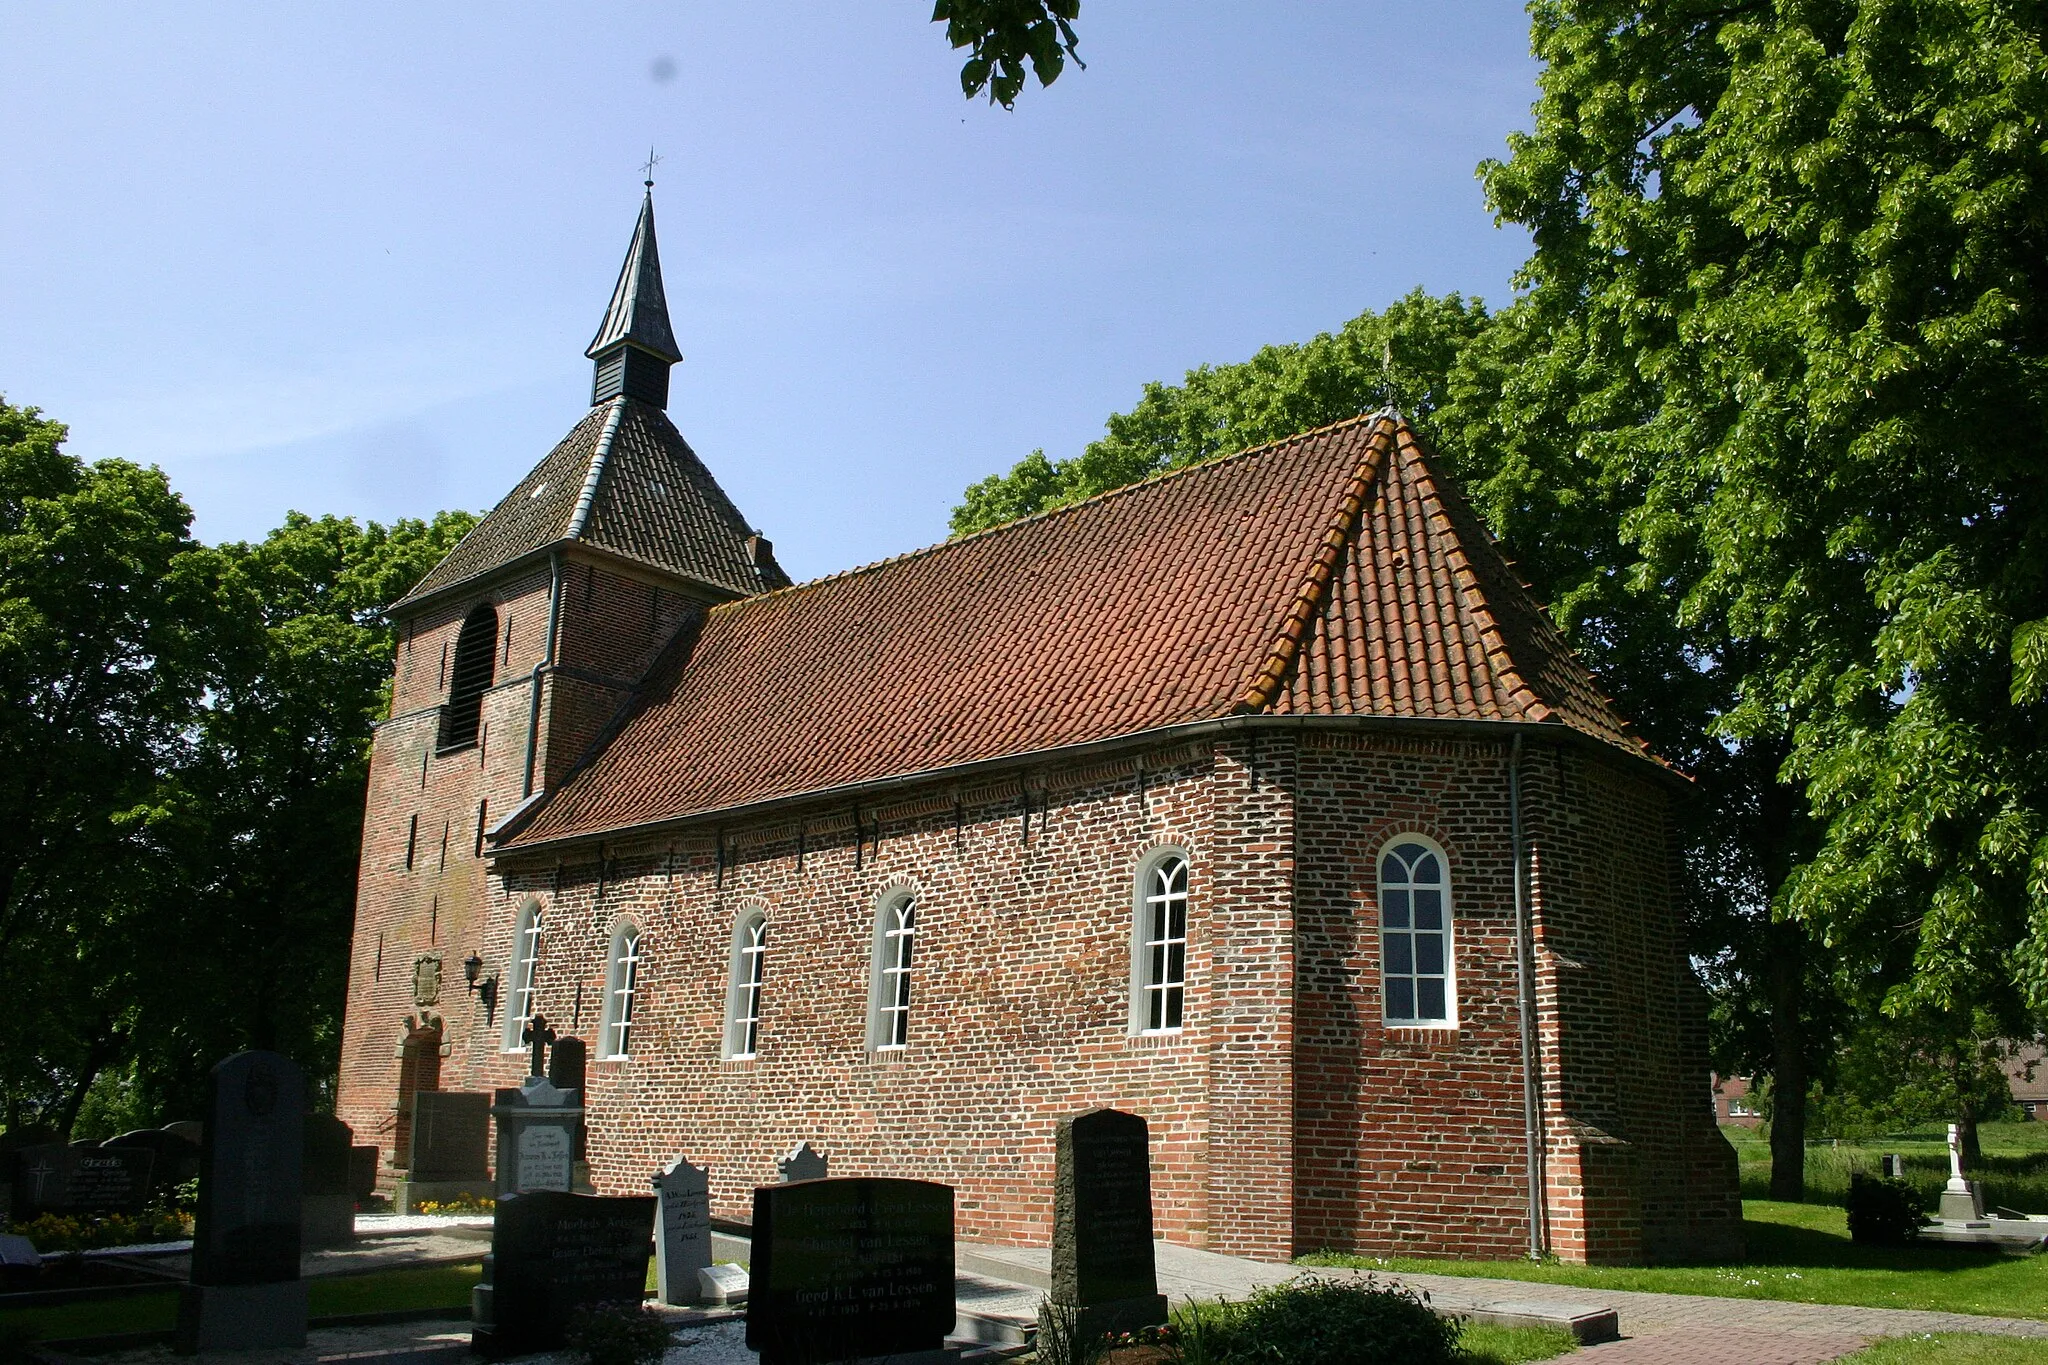 Photo showing: The Evangelical Reformed Böhmerwold Church in Böhmerwold (a locality of Jemgum), district of Leer, East Frisia, Lower Saxony, Germany, is owned and used by a Reformed congregation within the Evangelical Reformed Church – Synod of Reformed Churches in Bavaria and Northwestern Germany.